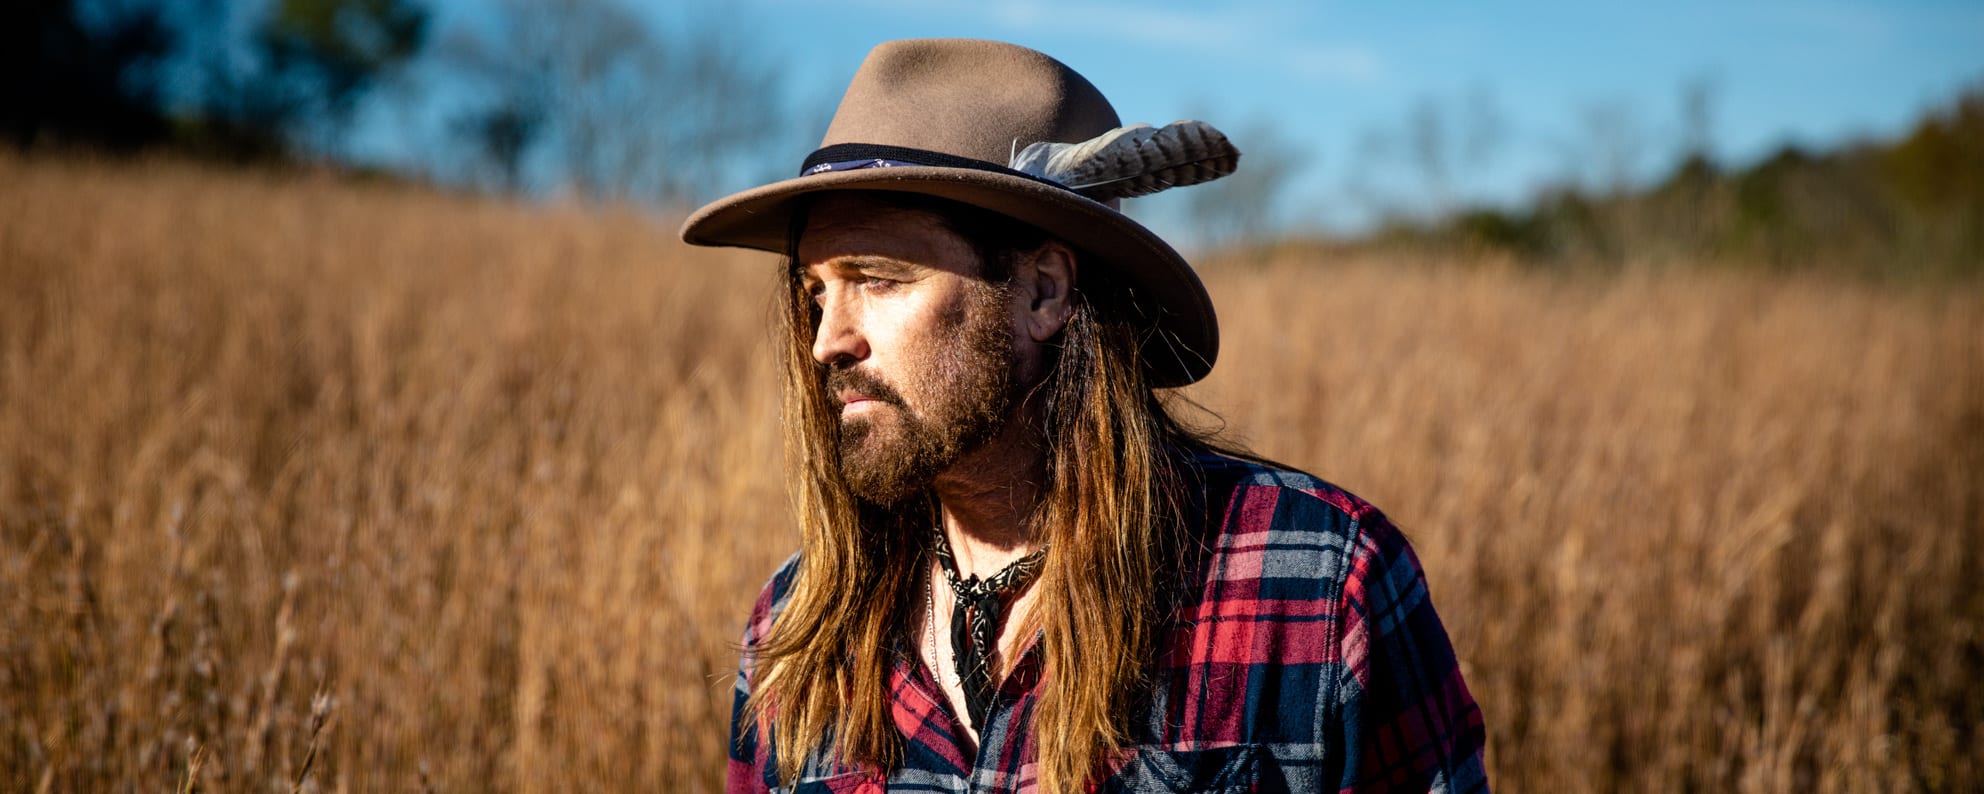 Billy Ray Cyrus Covers LL Cool J, Tracks Kentucky Roots on Latest ‘The Singin’ Hills Sessions’